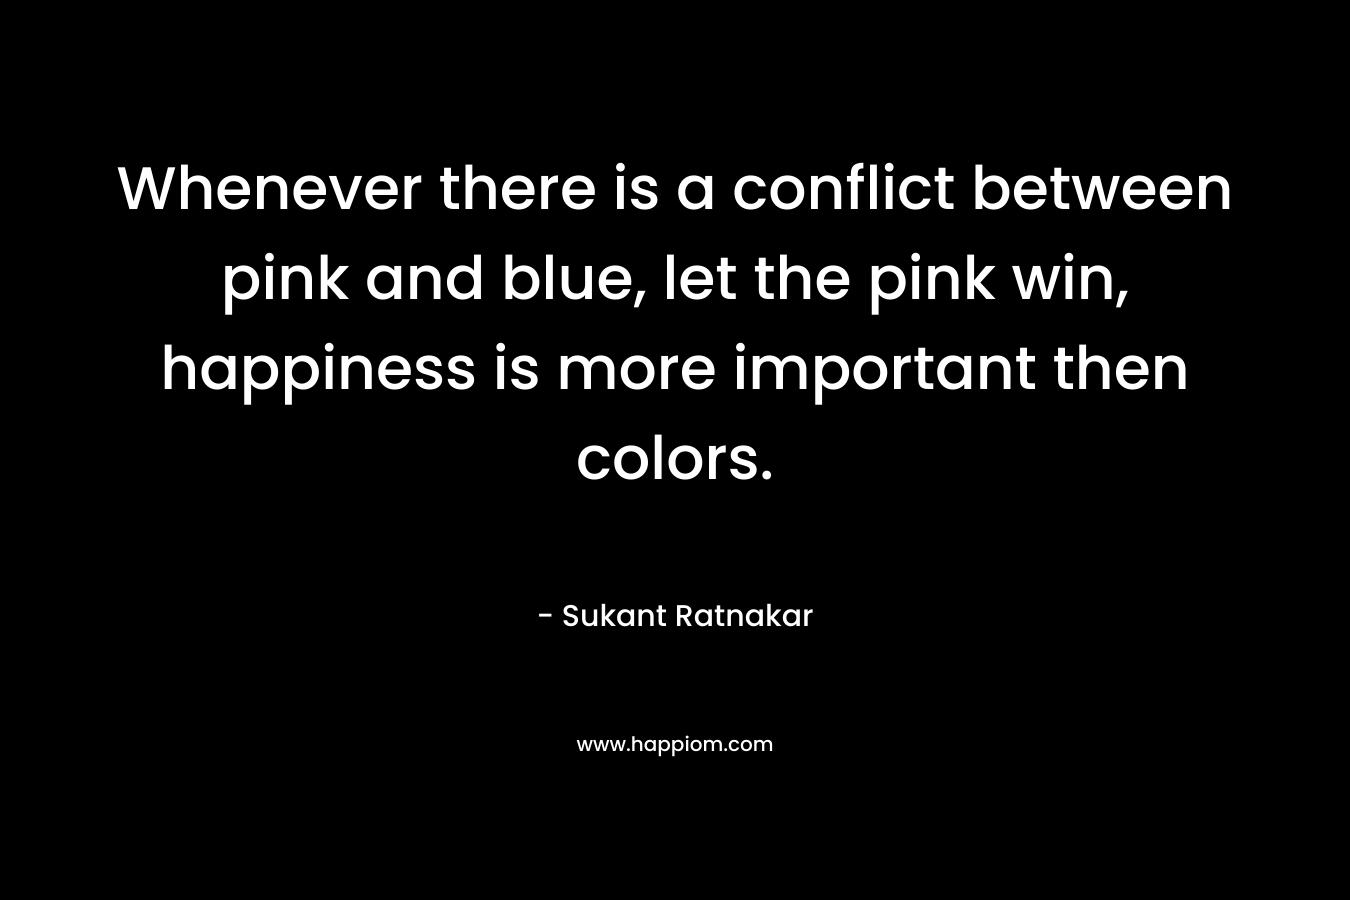 Whenever there is a conflict between pink and blue, let the pink win, happiness is more important then colors.